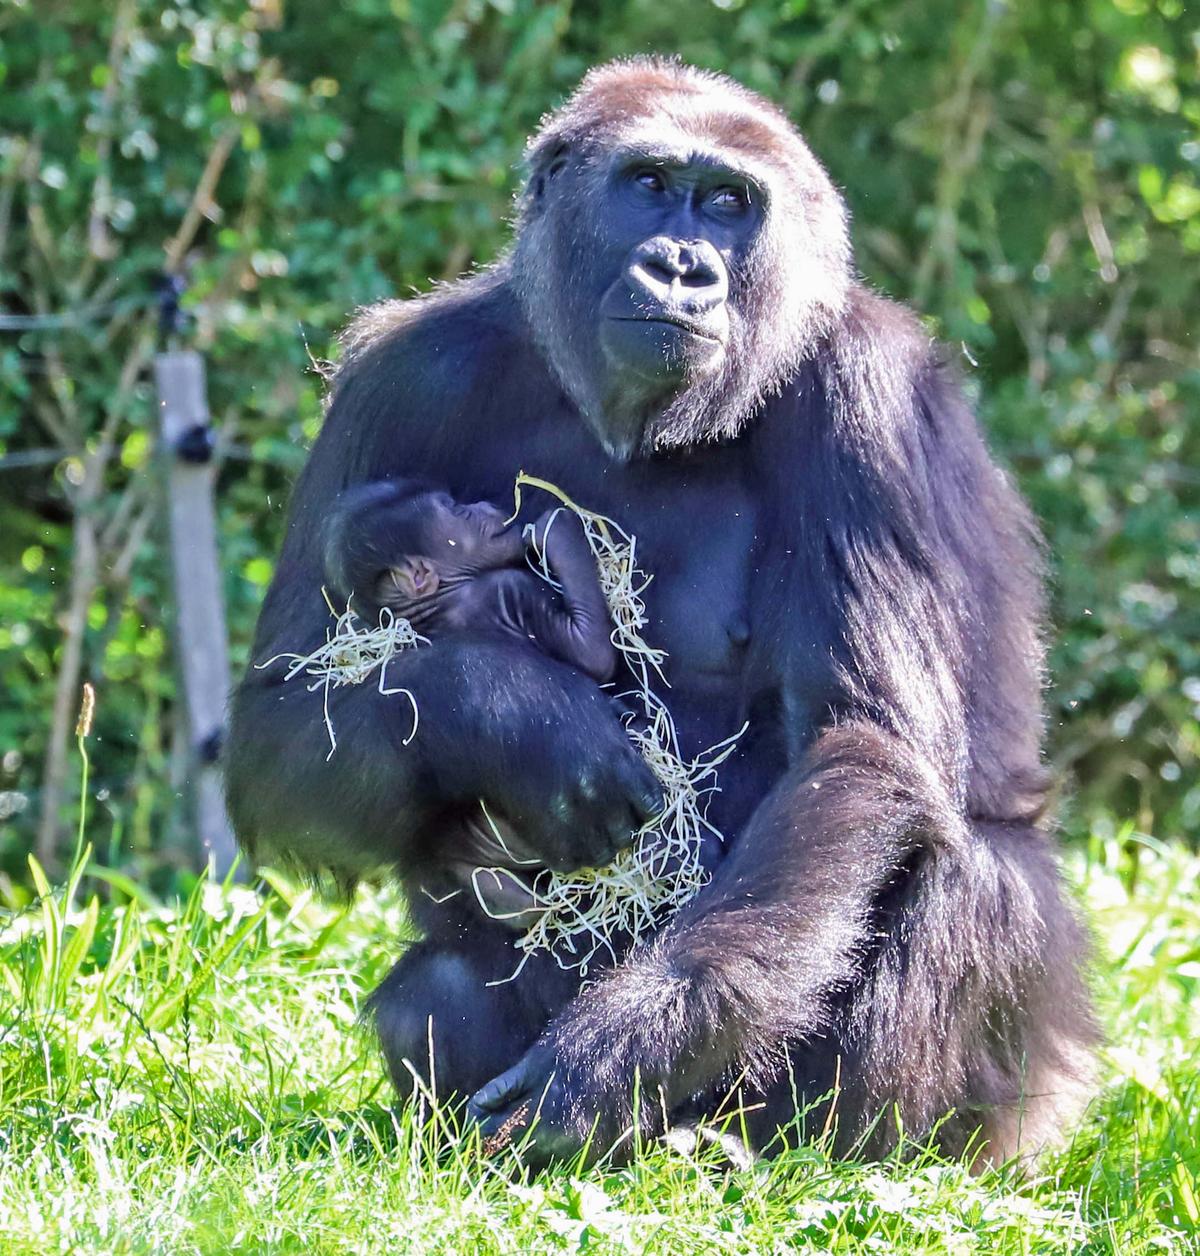 Kala with her newborn baby at Bristol Zoo. (Caters News)